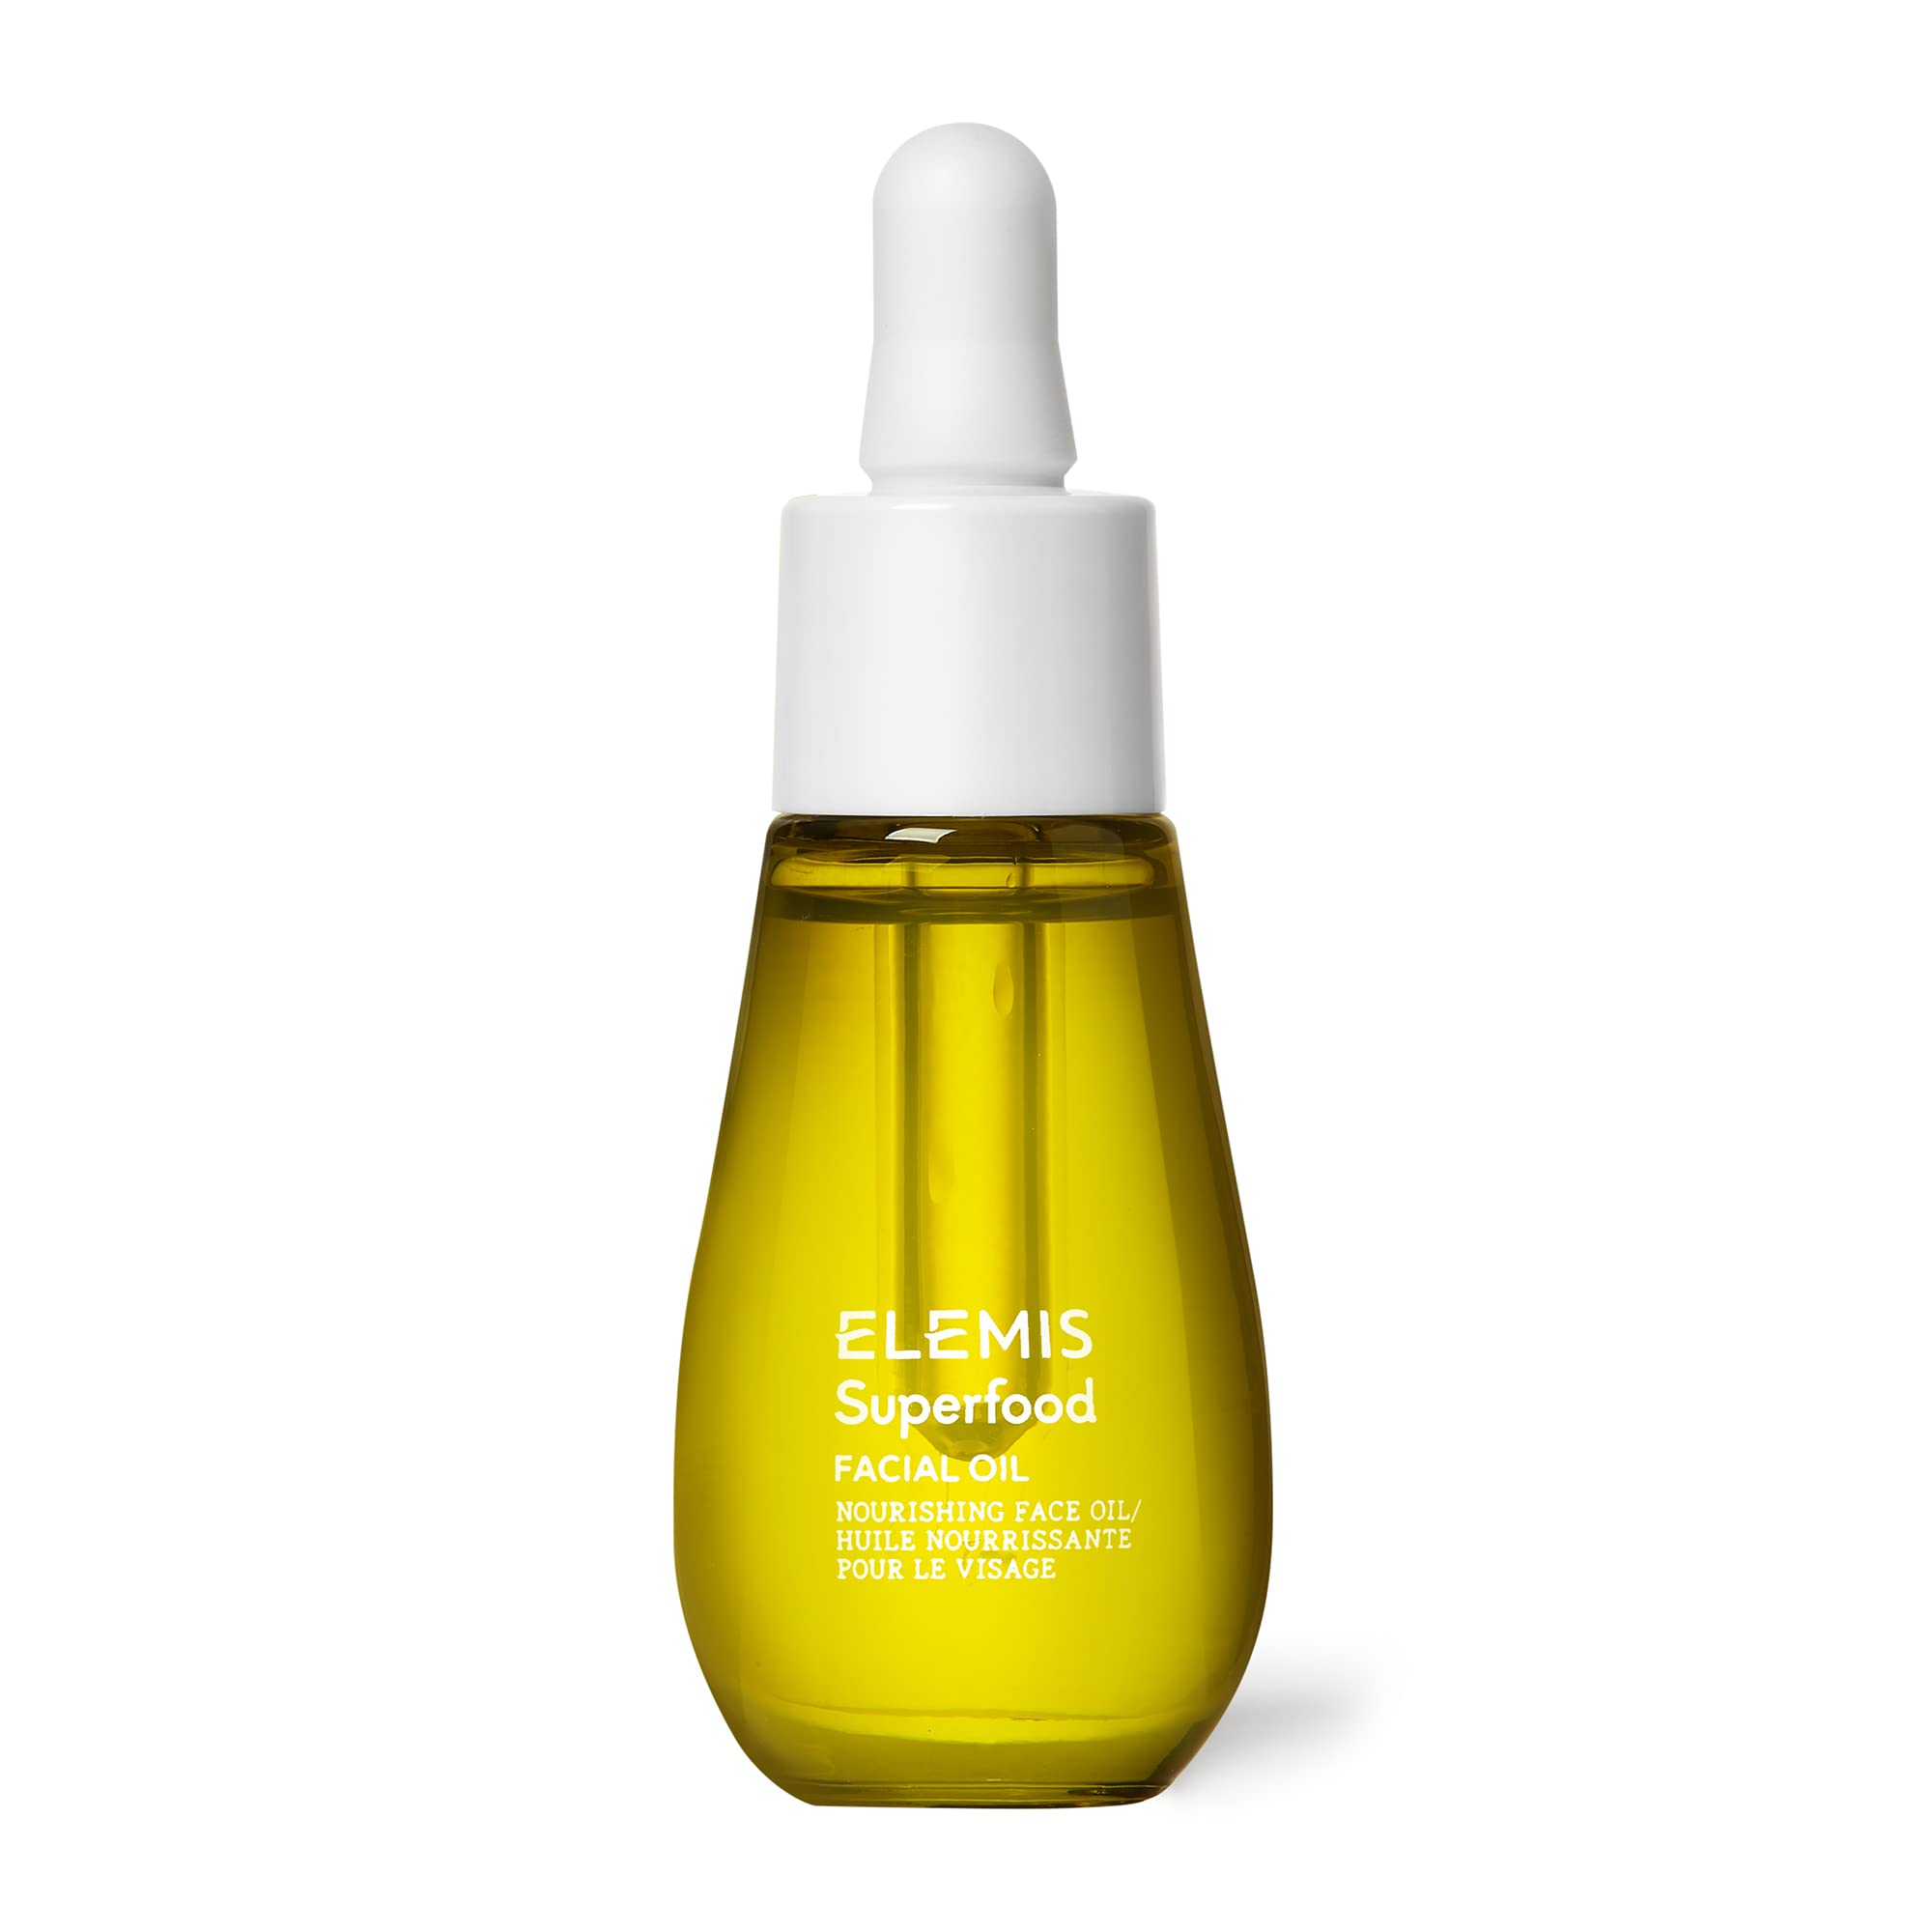 Elemis Superfood Facial Oil, Nourishing Face Oil Formulated with 9 Antioxidant-Rich Superfoods, Award-Winning Facial Oil to Enhance Radiance and Complexion, Lightweight Oil to Plump and Smooth, 15 ml